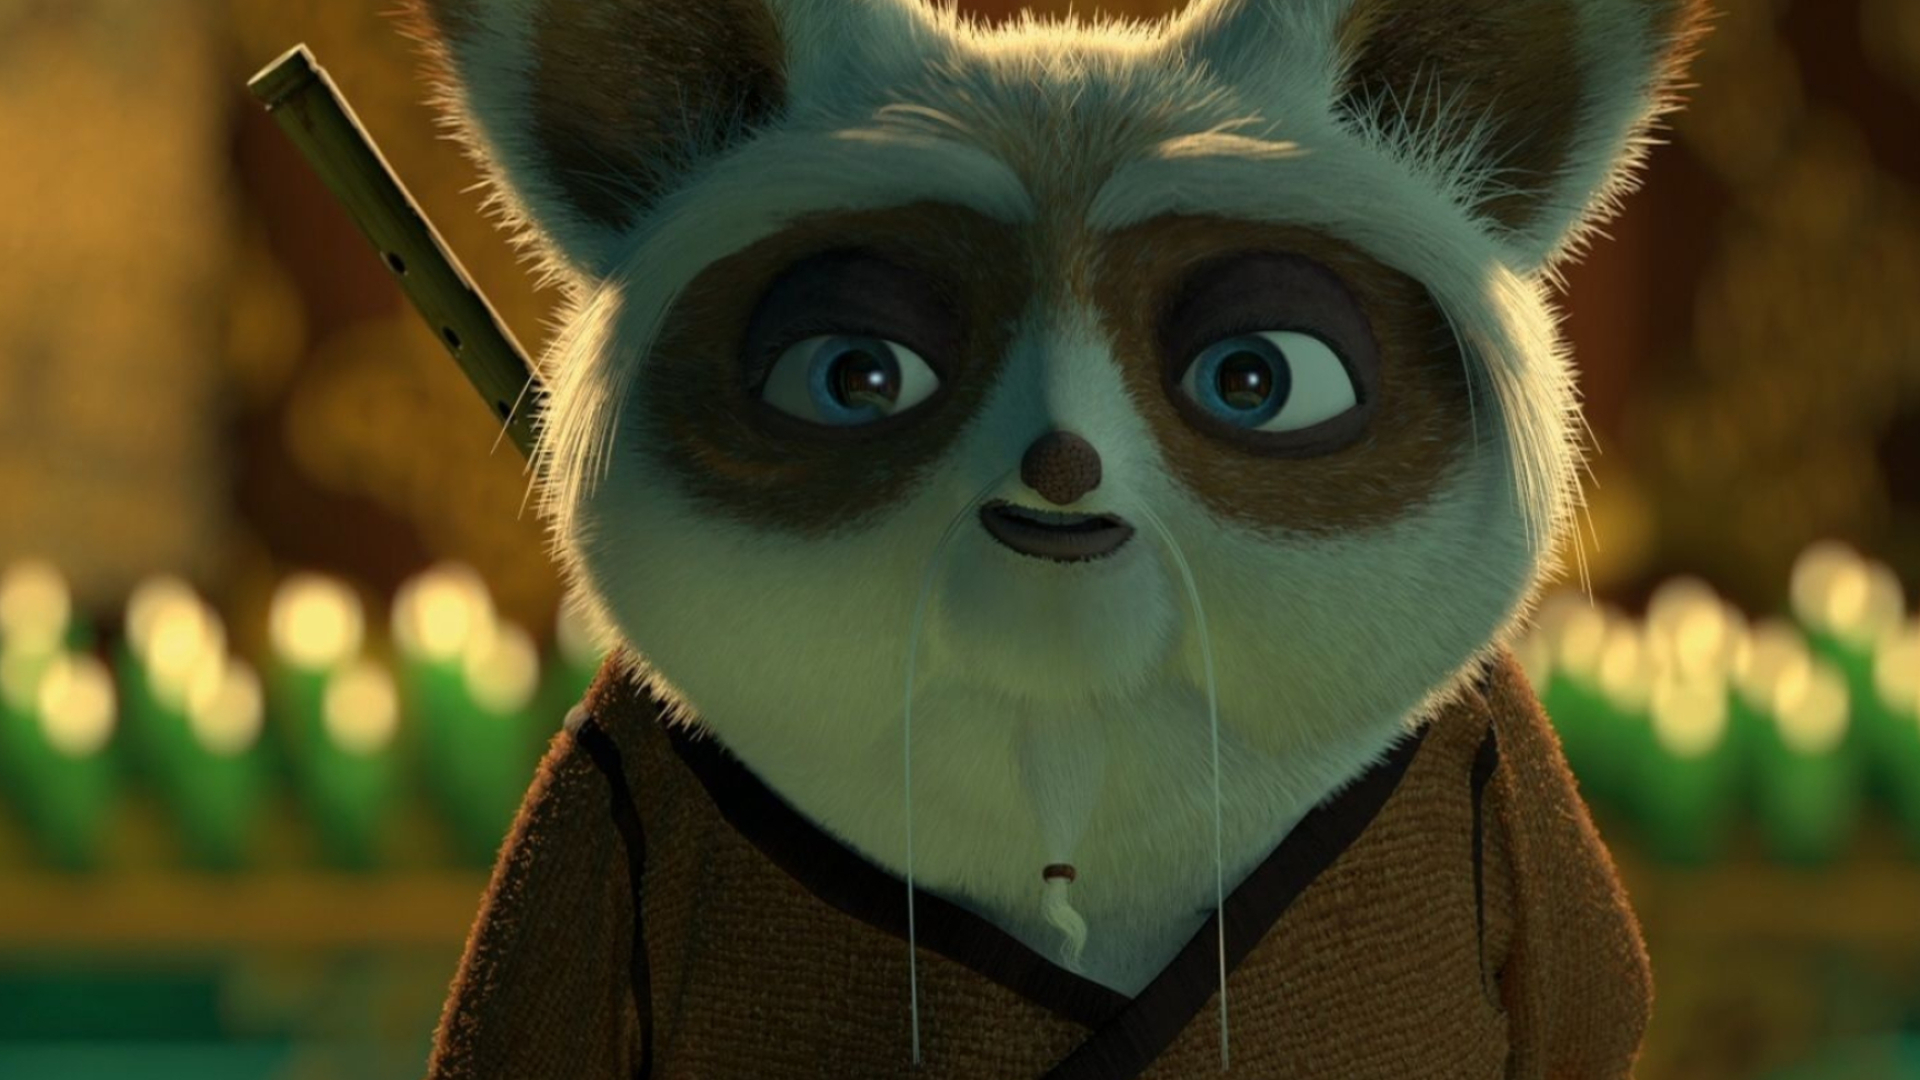 Master Shifu: Kung Fu Panda, Voiced by Dustin Hoffman in the films and TV specials. 1920x1080 Full HD Wallpaper.